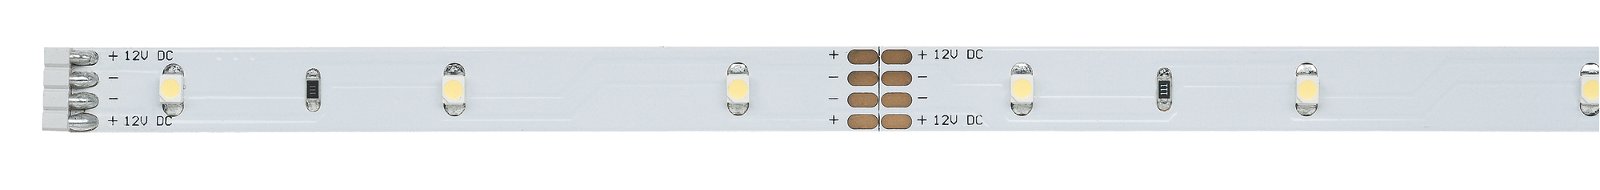 YourLED ECO Strip LED Blanc chaud Strip individuel 1m 2,4W 160lm/m 3000K